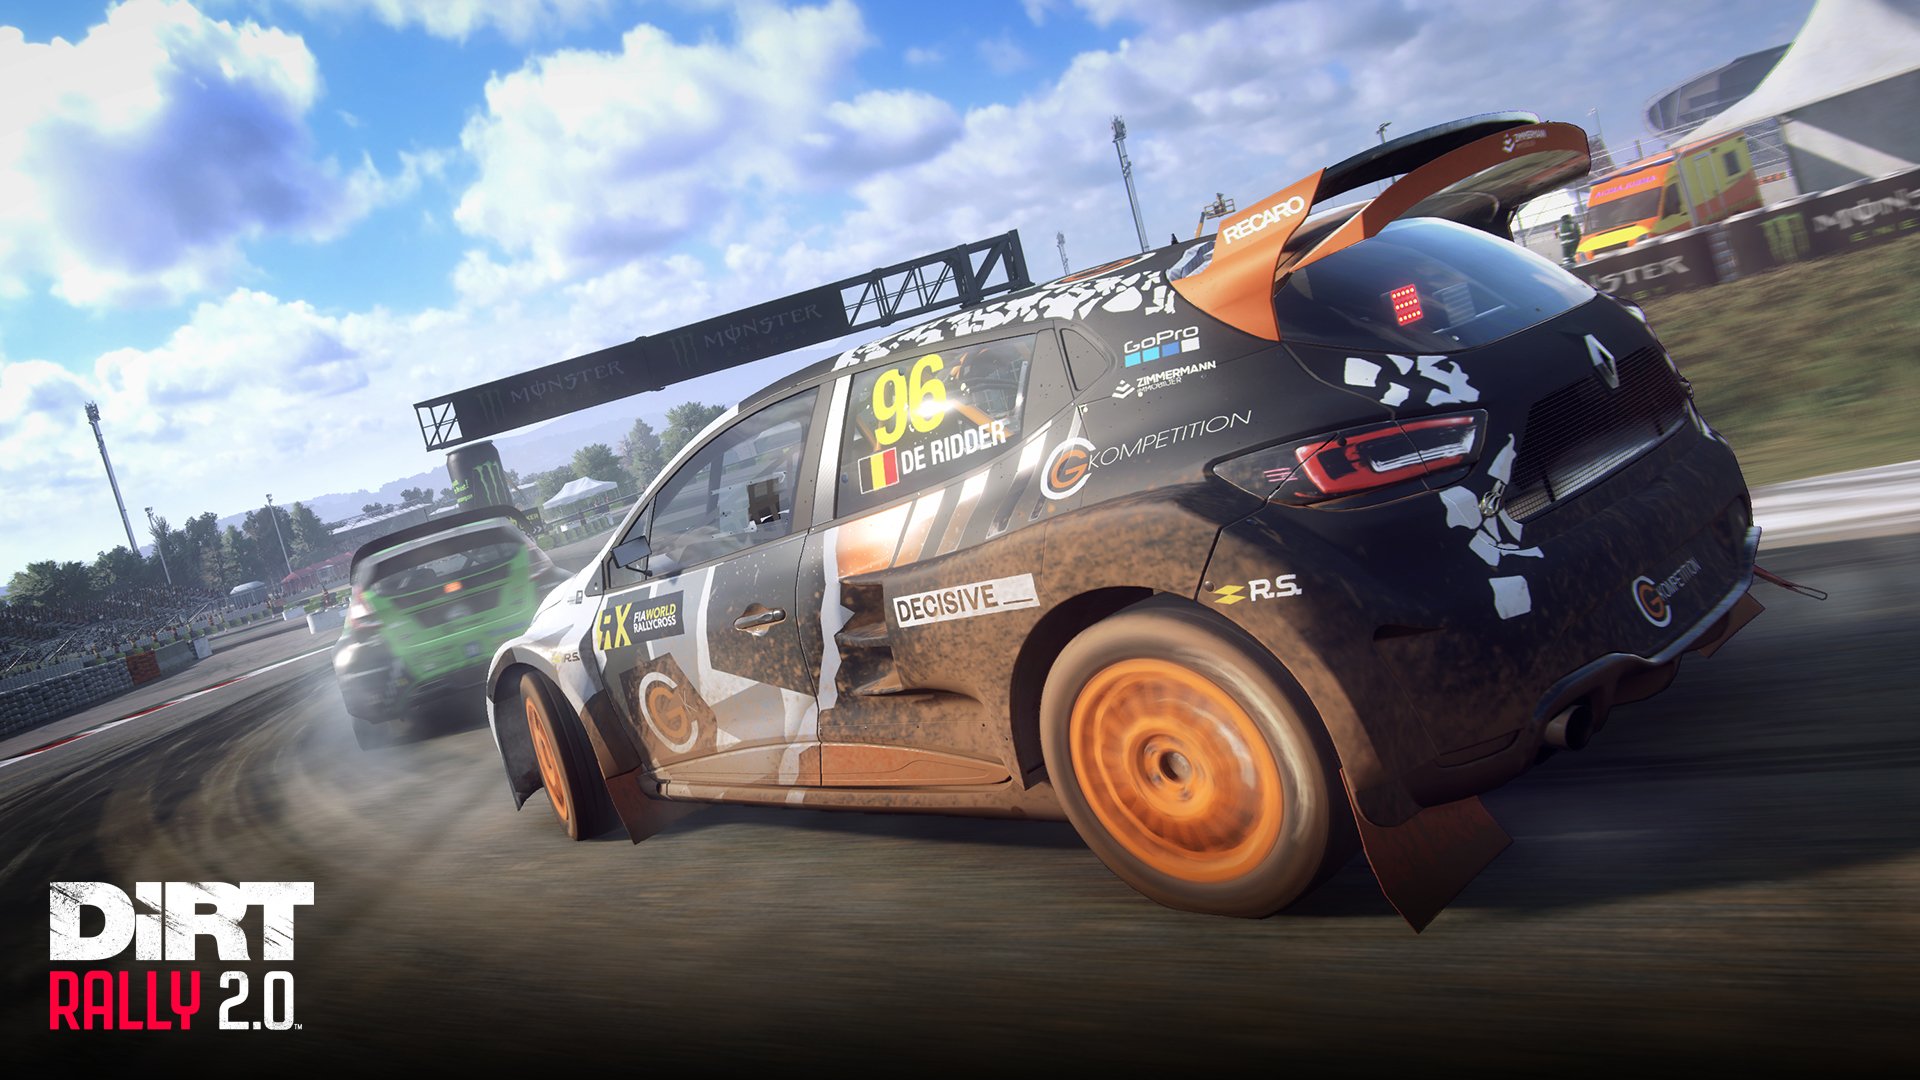 More information about "DiRT Rally 2.0: World RX Supercars 2019 (Parte 3) disponibili"